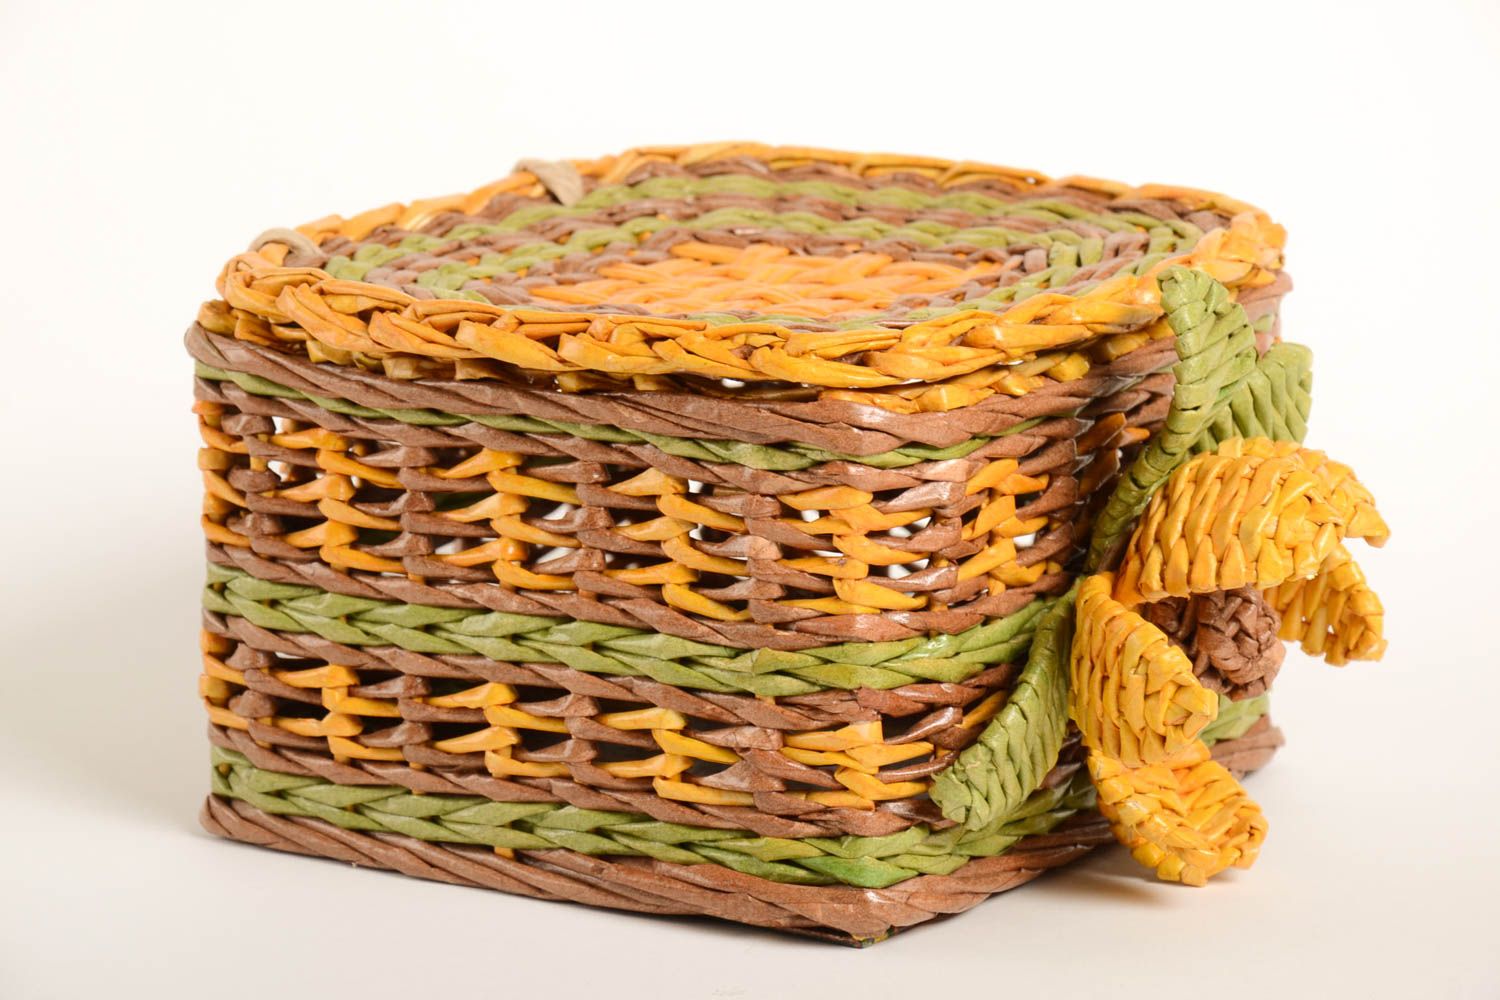 Stylish handmade woven bread basket cute unusual home accessories lovely decor photo 2